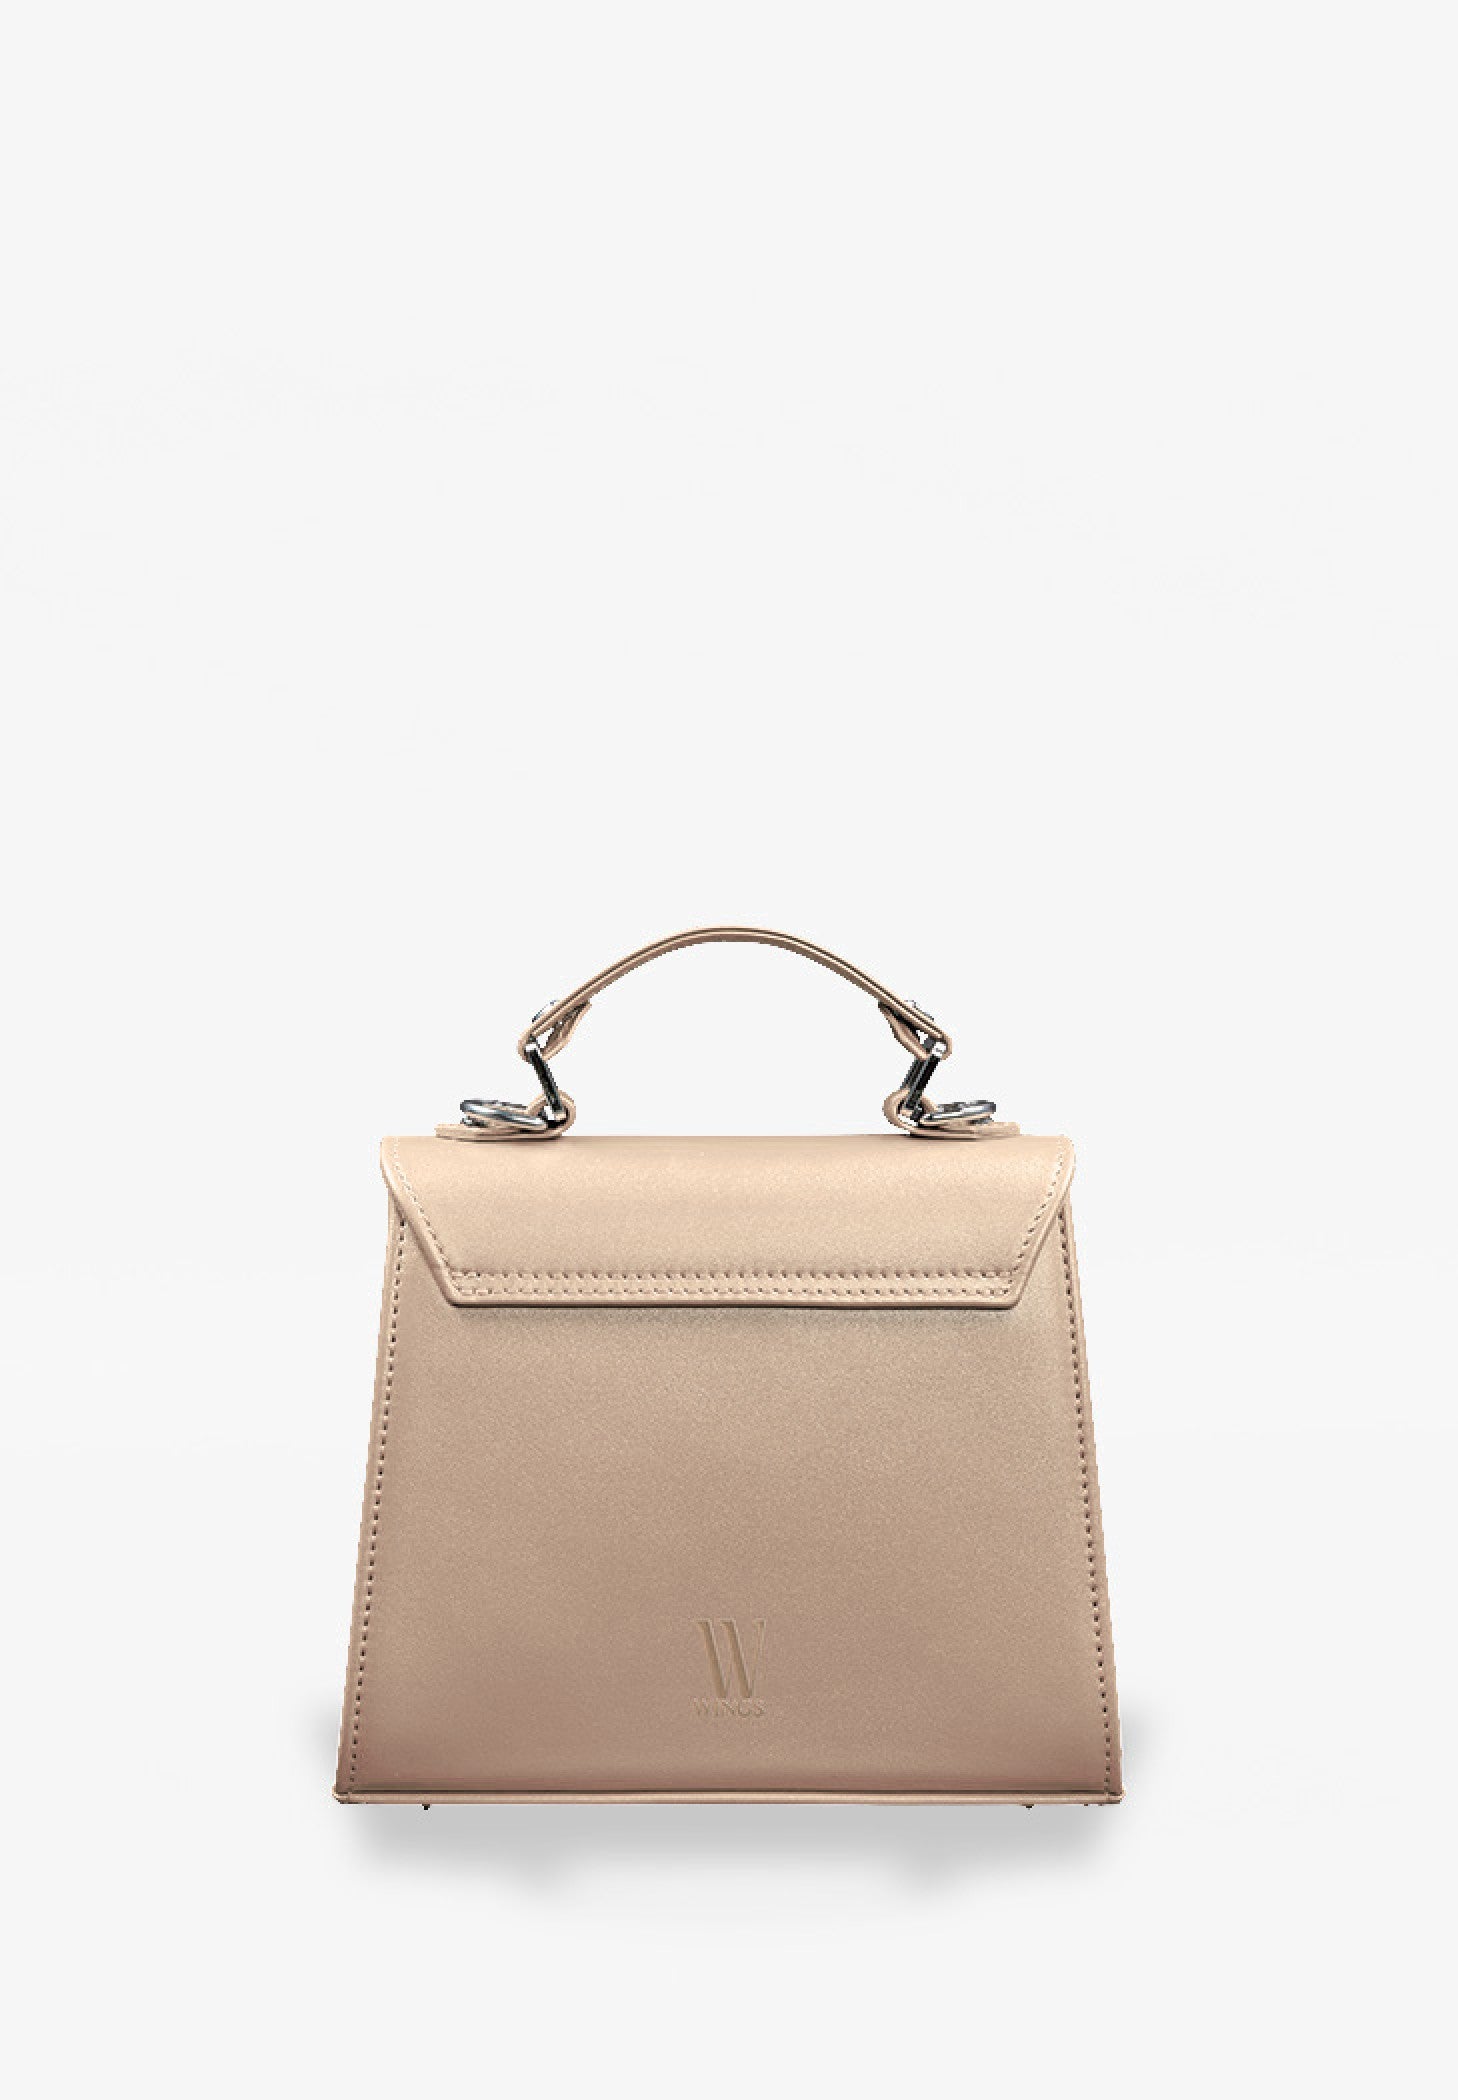 leather mid-sized bag for women in nude color